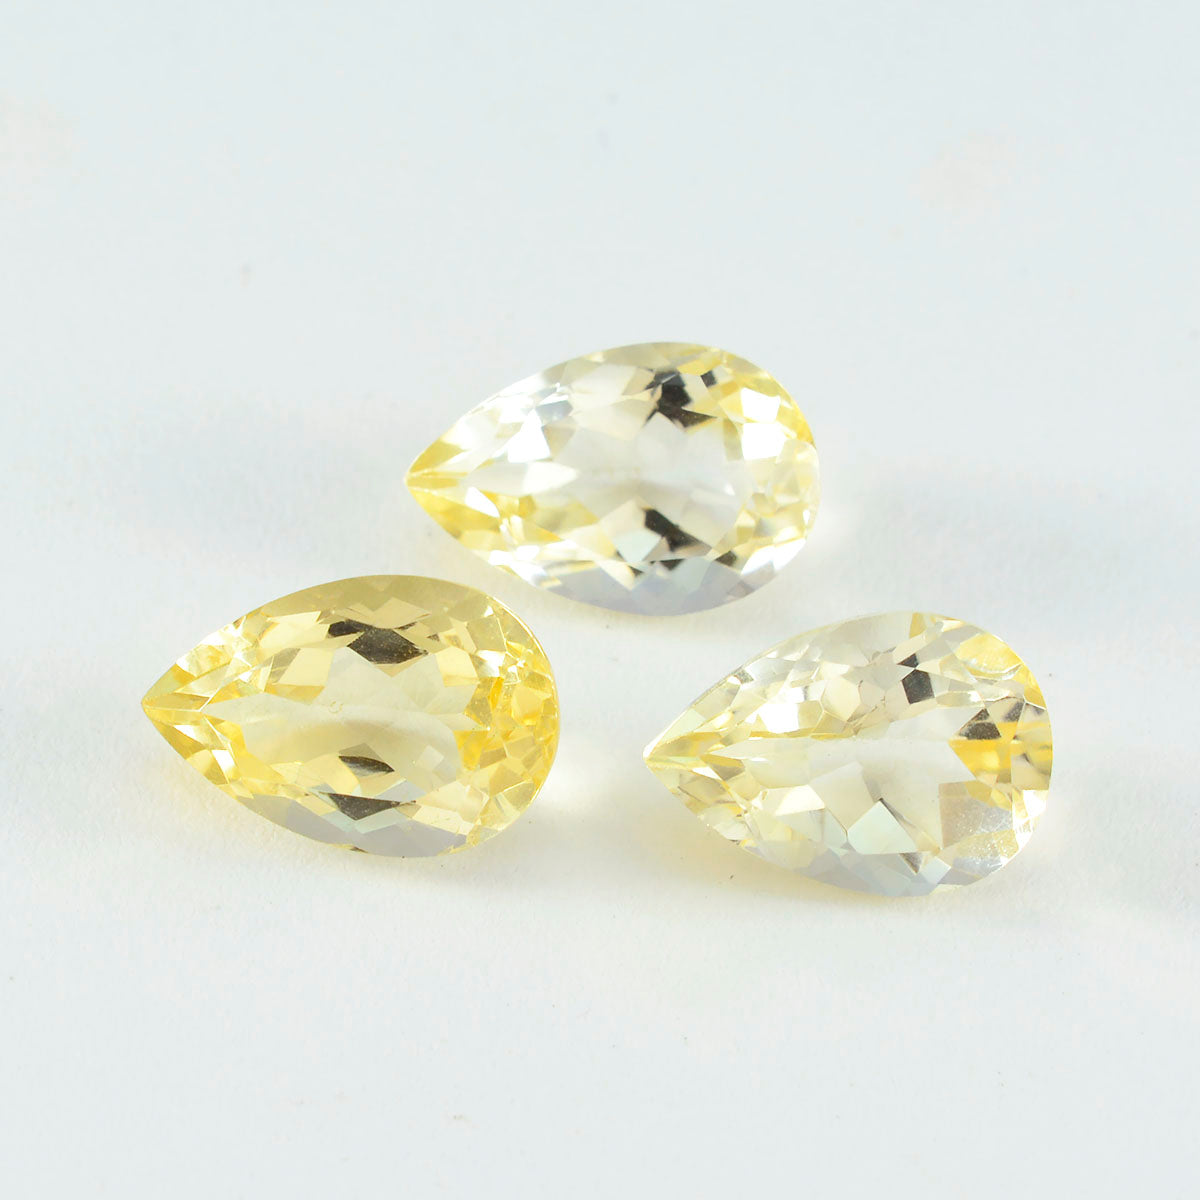 Riyogems 1PC Natural Yellow Citrine Faceted 12X16 mm Pear Shape sweet Quality Loose Gem